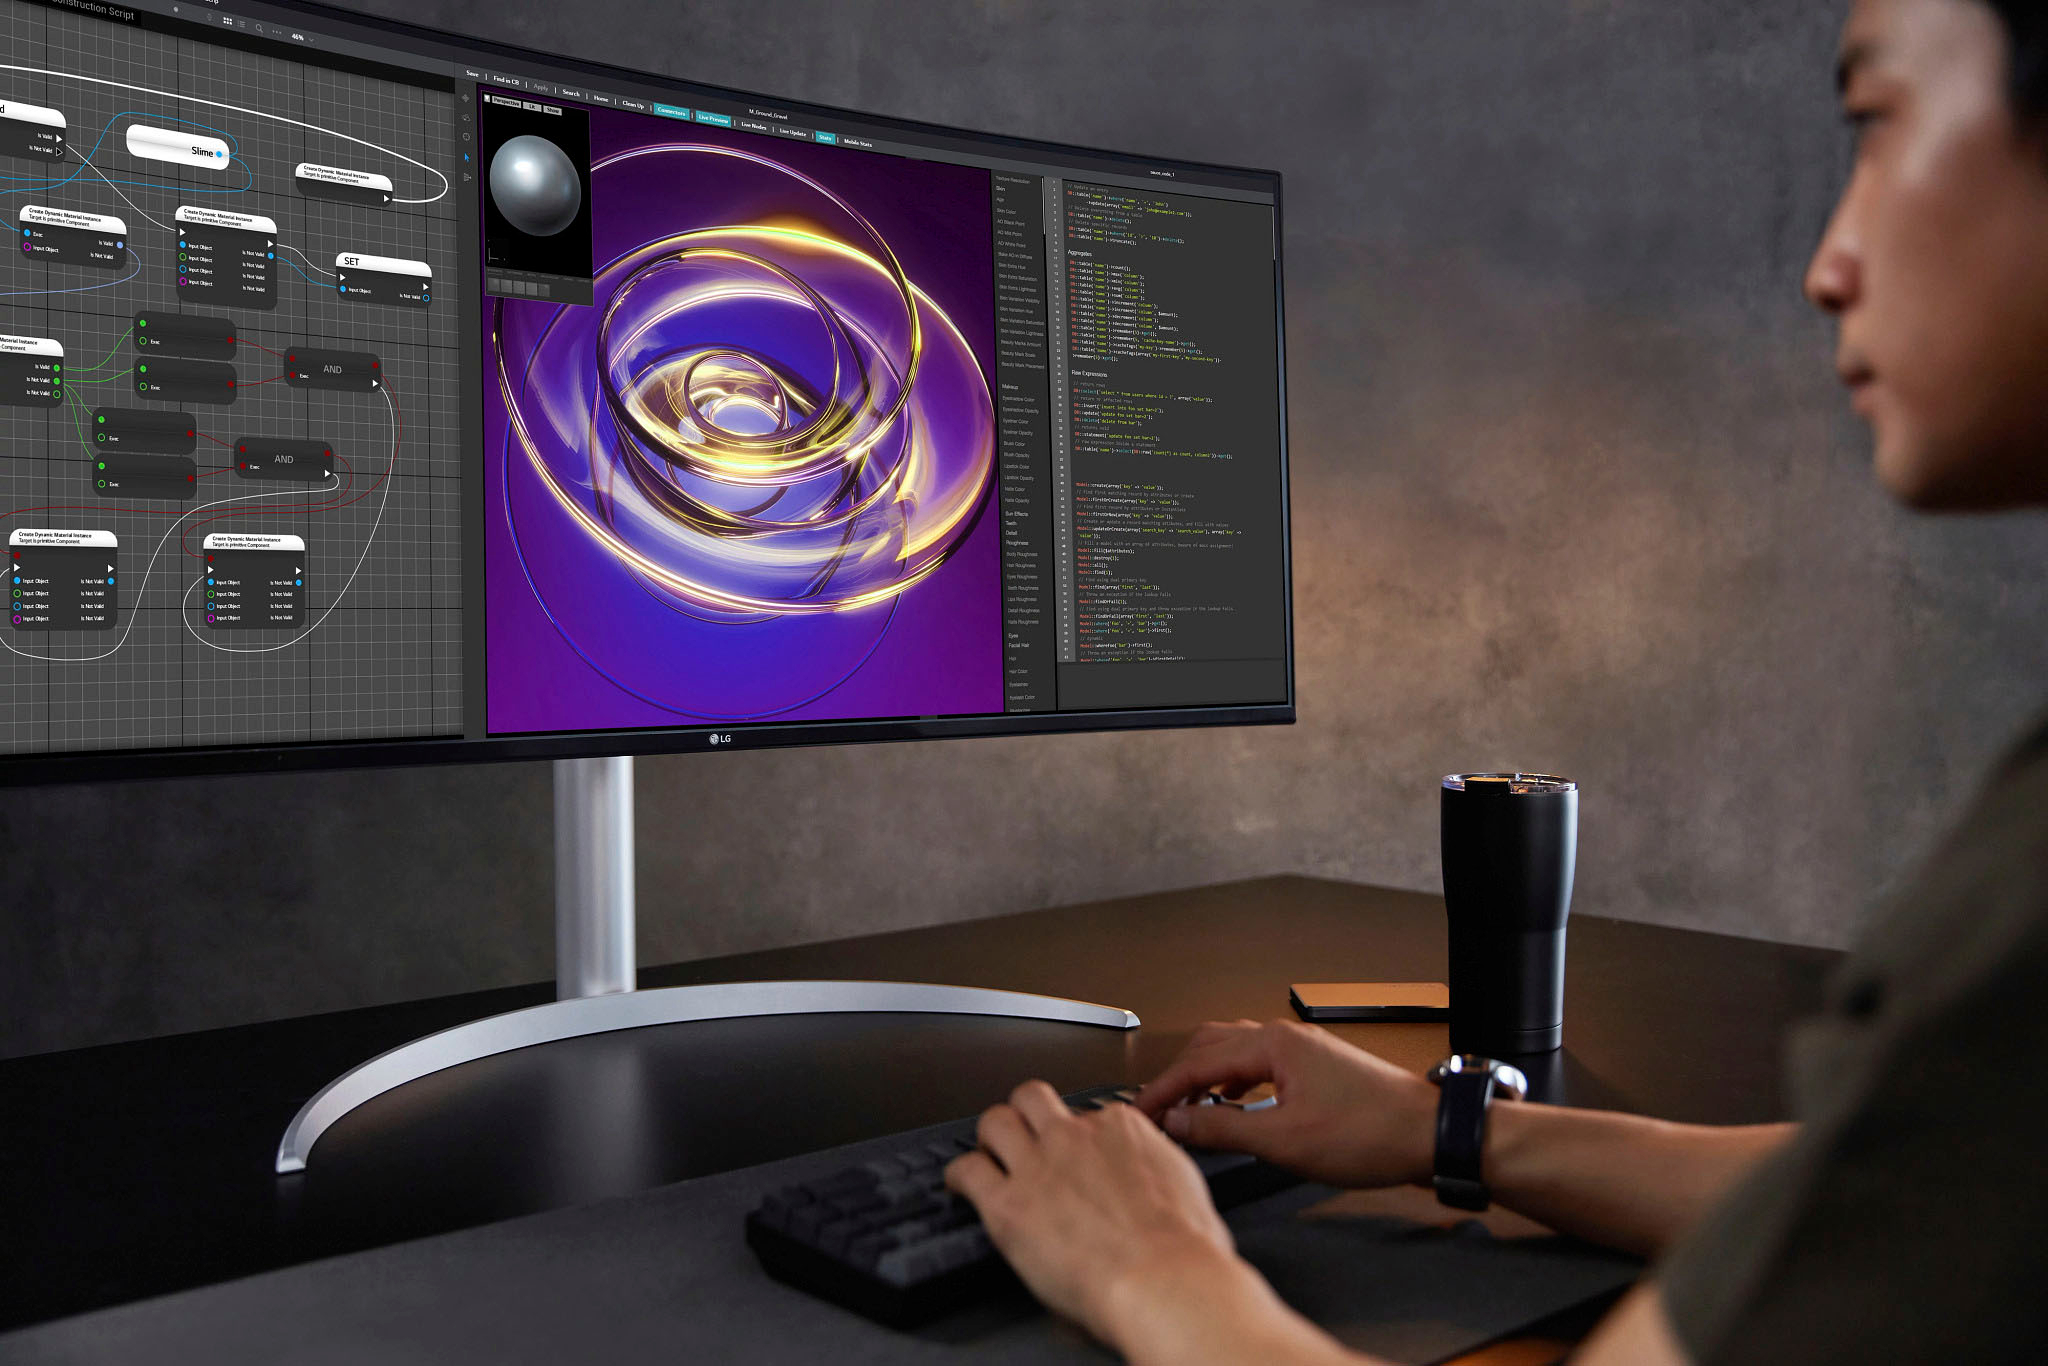 40 Curved UltraWide® 5K2K Nano IPS Monitor with Thunderbolt™ 4 Connectivity